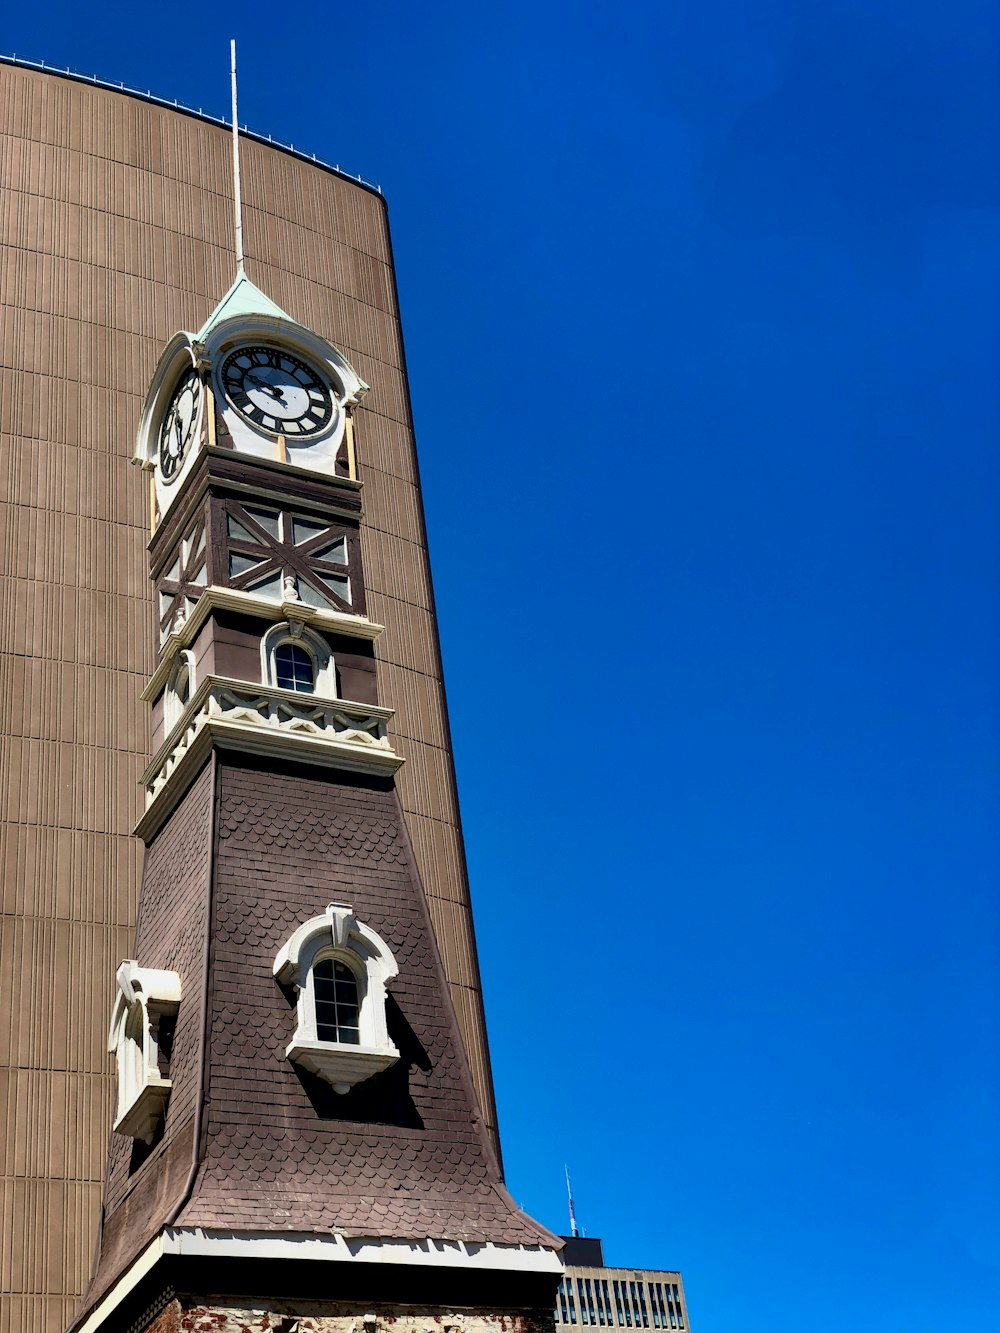 gray and white tower clock during daytime